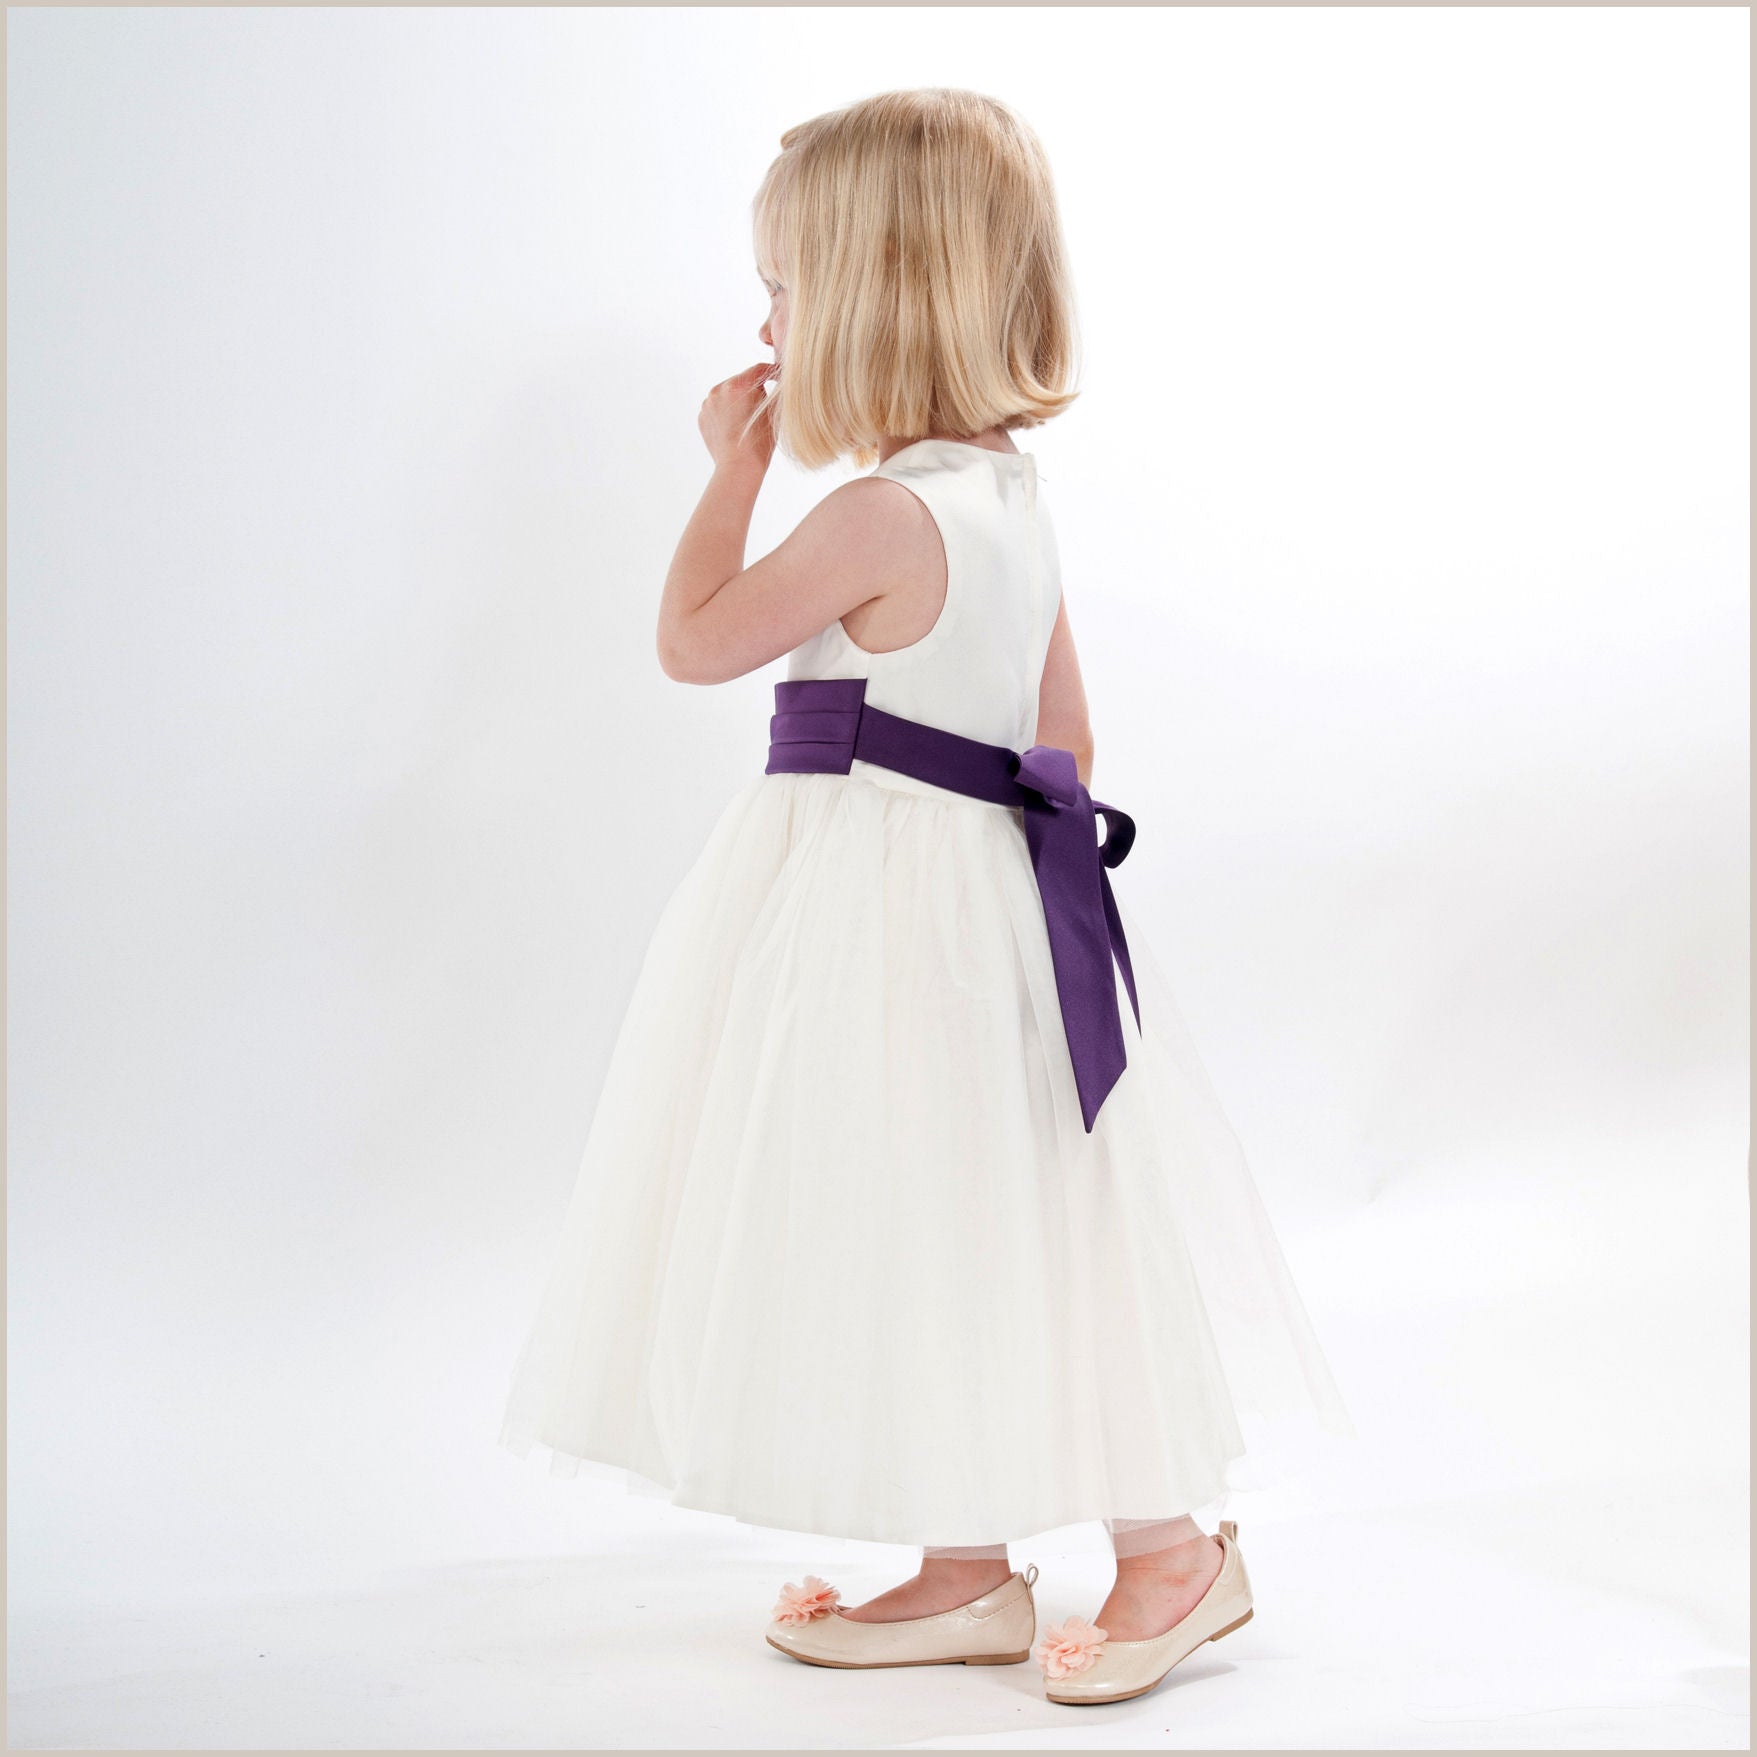 Ivory Flower Girl Dress with Purple Sash by Demigella